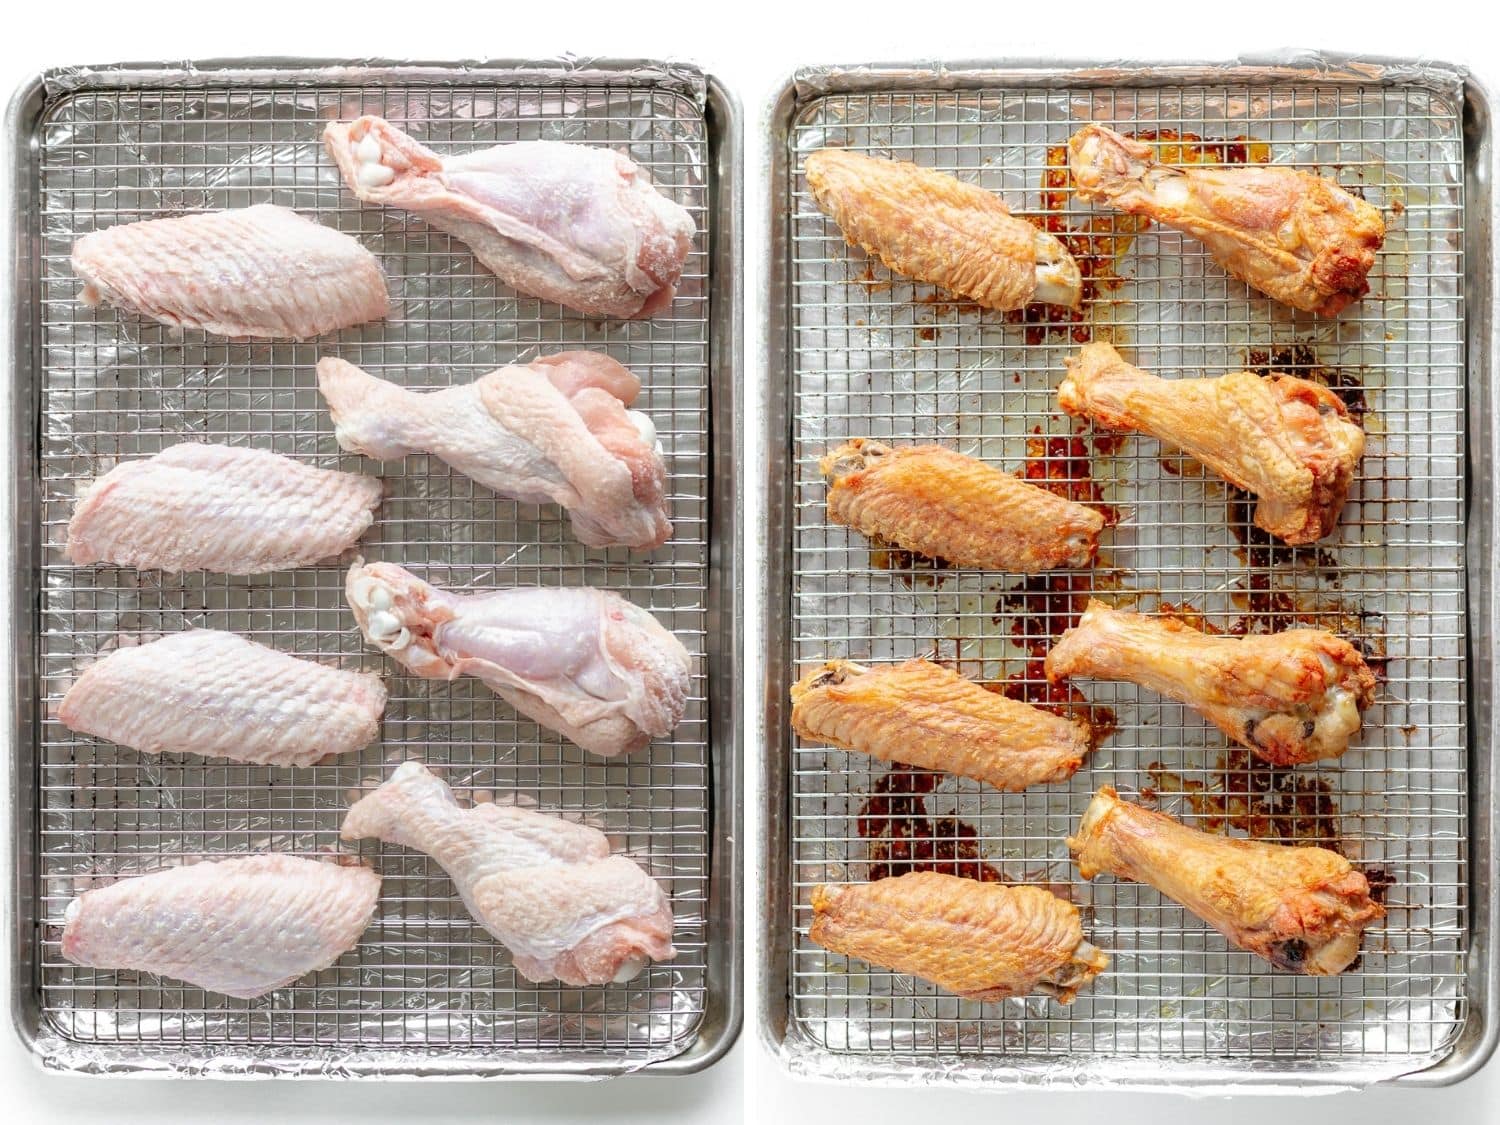 Turkey wings on a baking sheet before and after being baked in the oven.